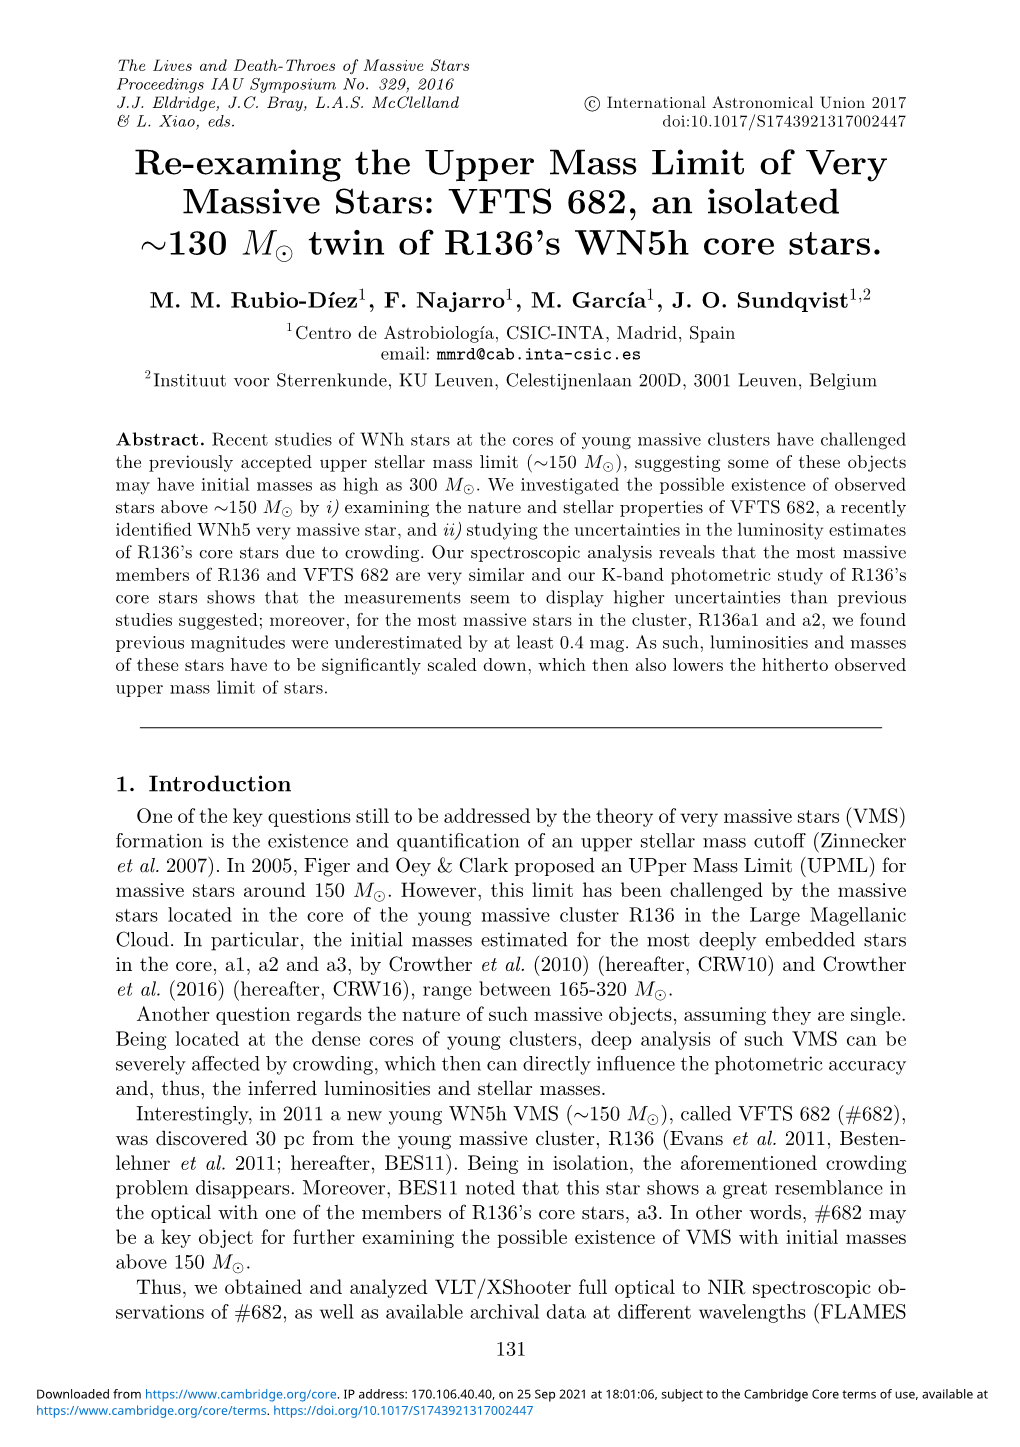 Re-Examing the Upper Mass Limit of Very Massive Stars: VFTS 682, an Isolated ∼130 M Twin of R136’S Wn5h Core Stars